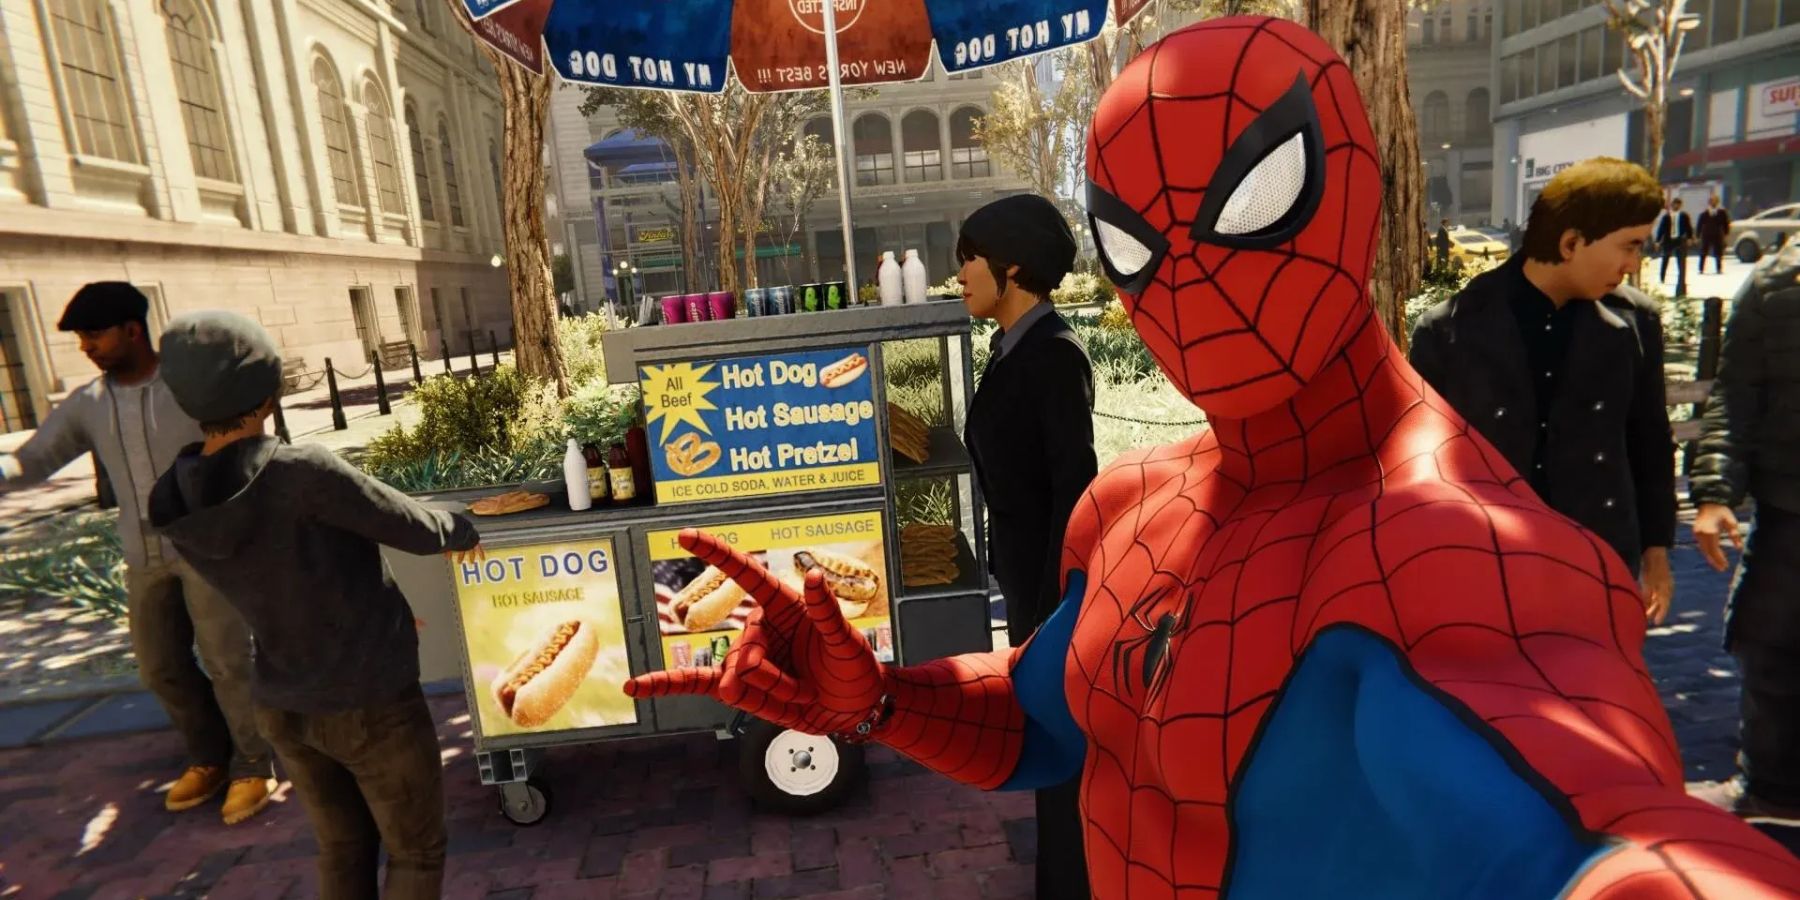 The gameplay and visuals of Marvel's Spider-Man are mindlessly enjoyable, like eating junk food.